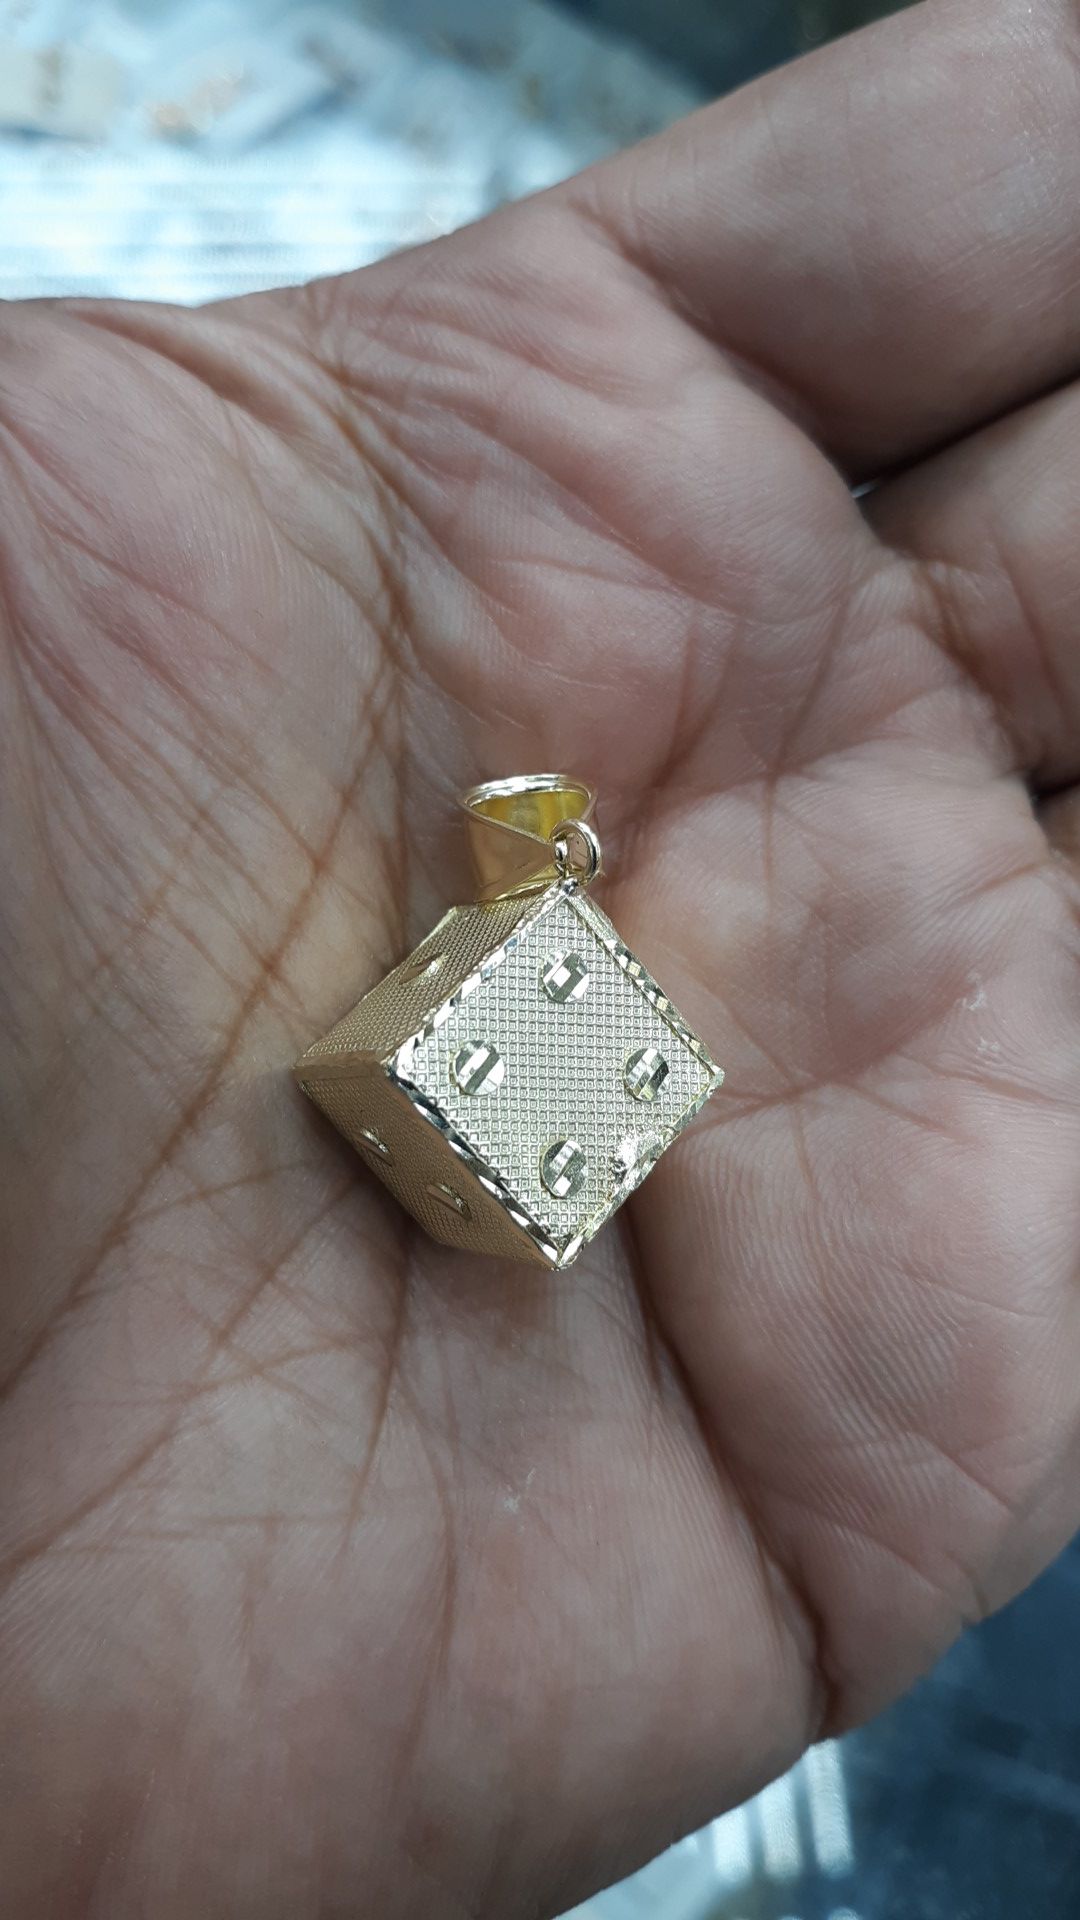 10k gold dice charm 1 inch with bell 6.8 grams